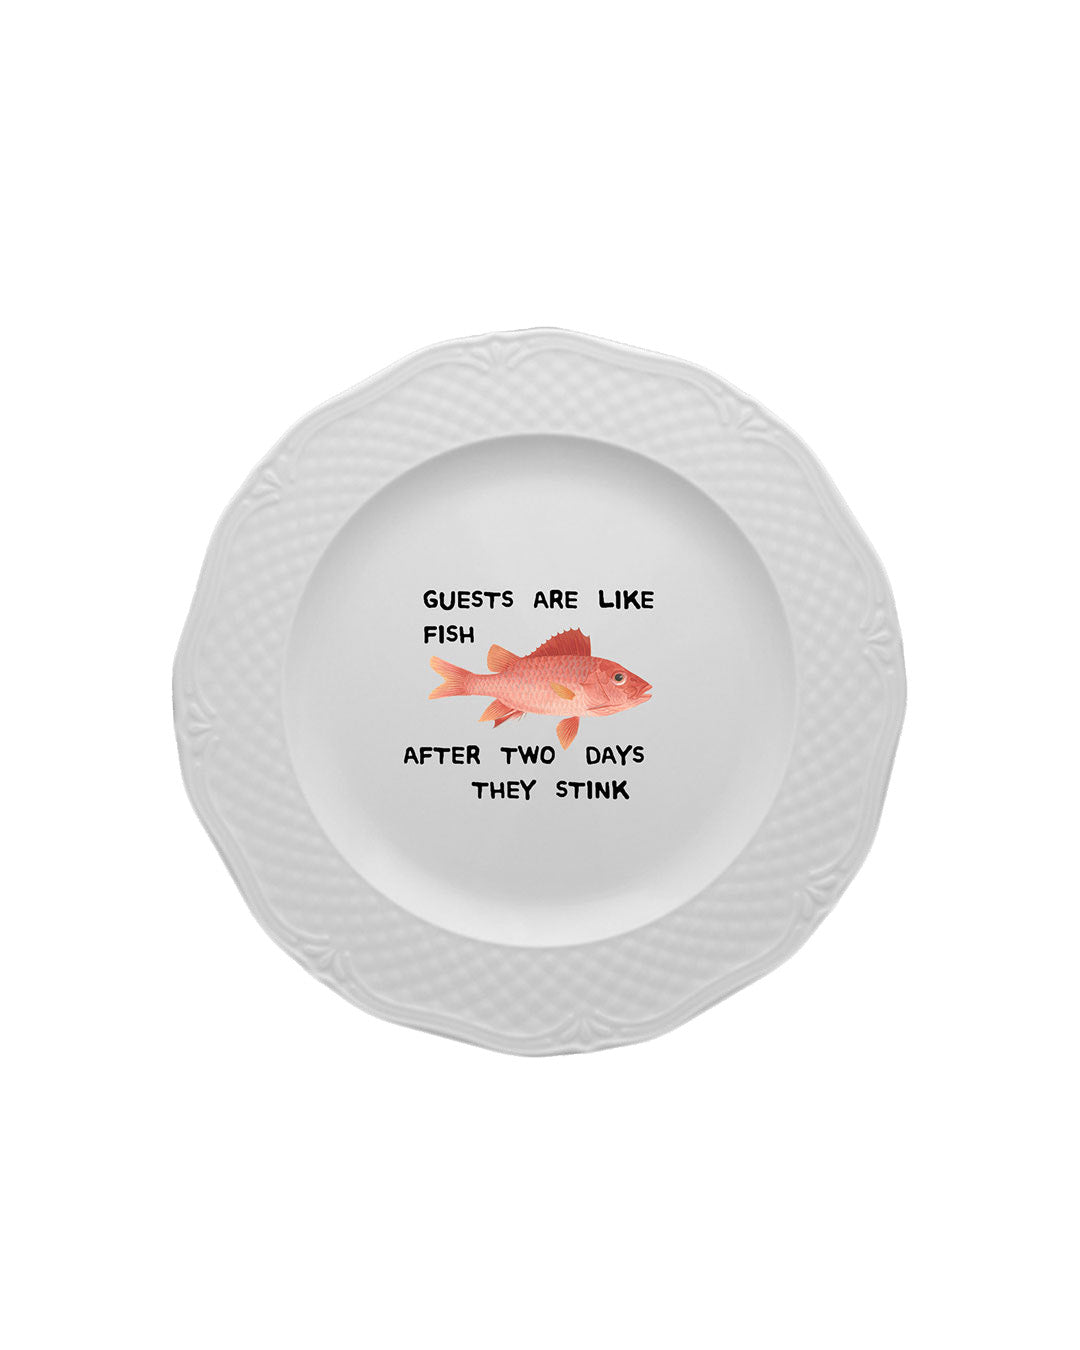 Very Ugly Plate "Guests are like fish"